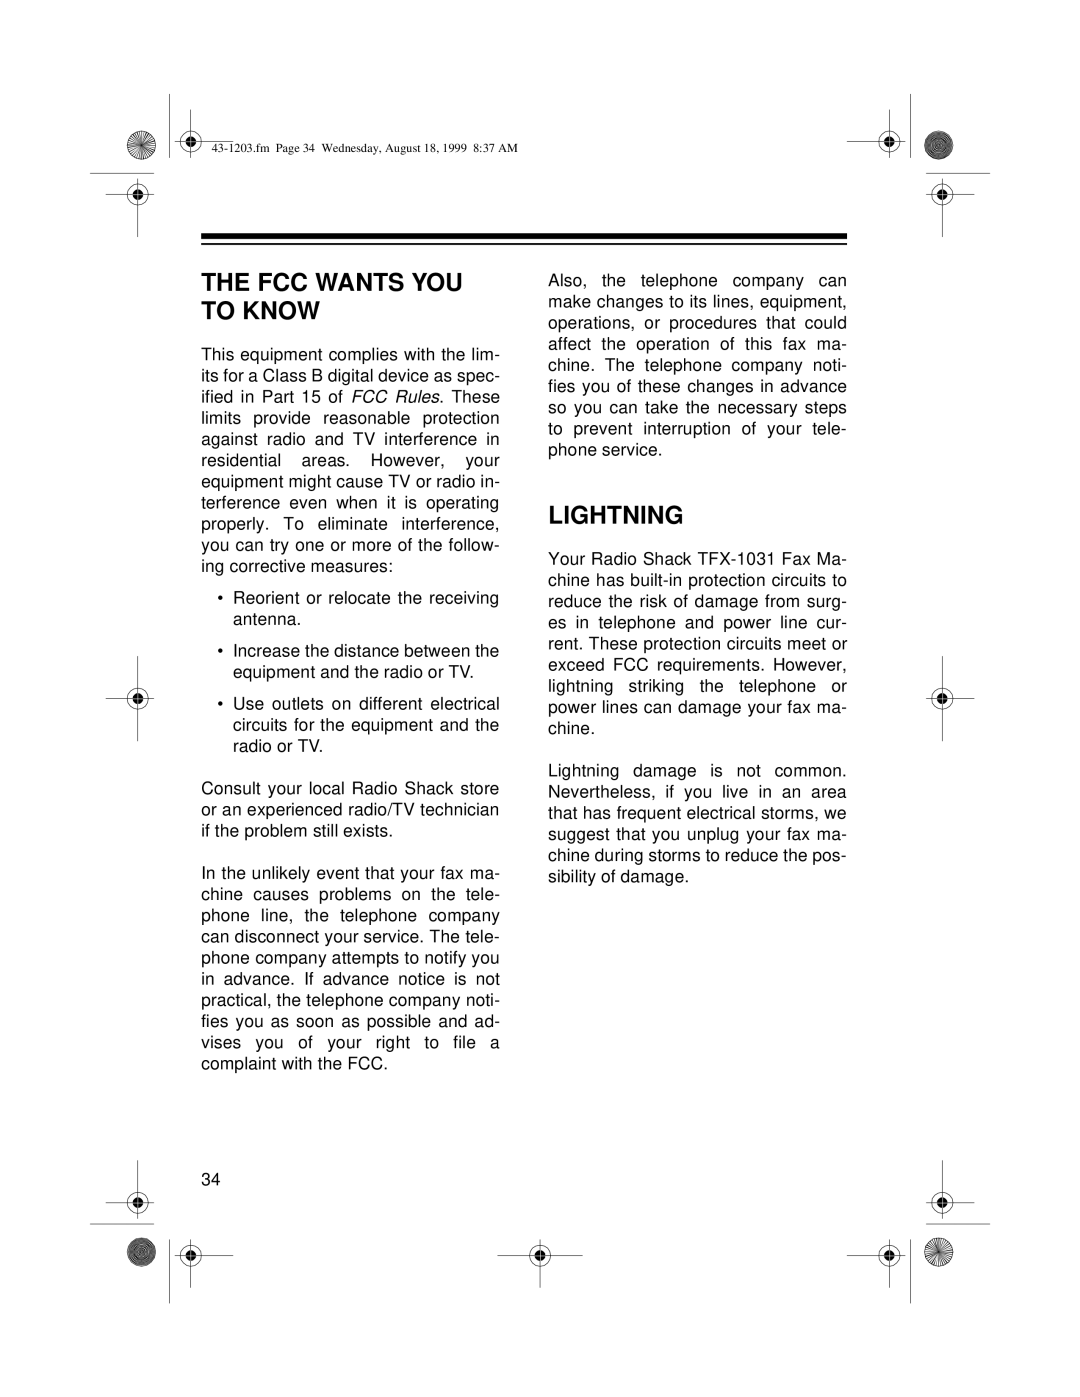 Radio Shack TFX-1031 owner manual The Fcc Wants You To Know, Lightning 